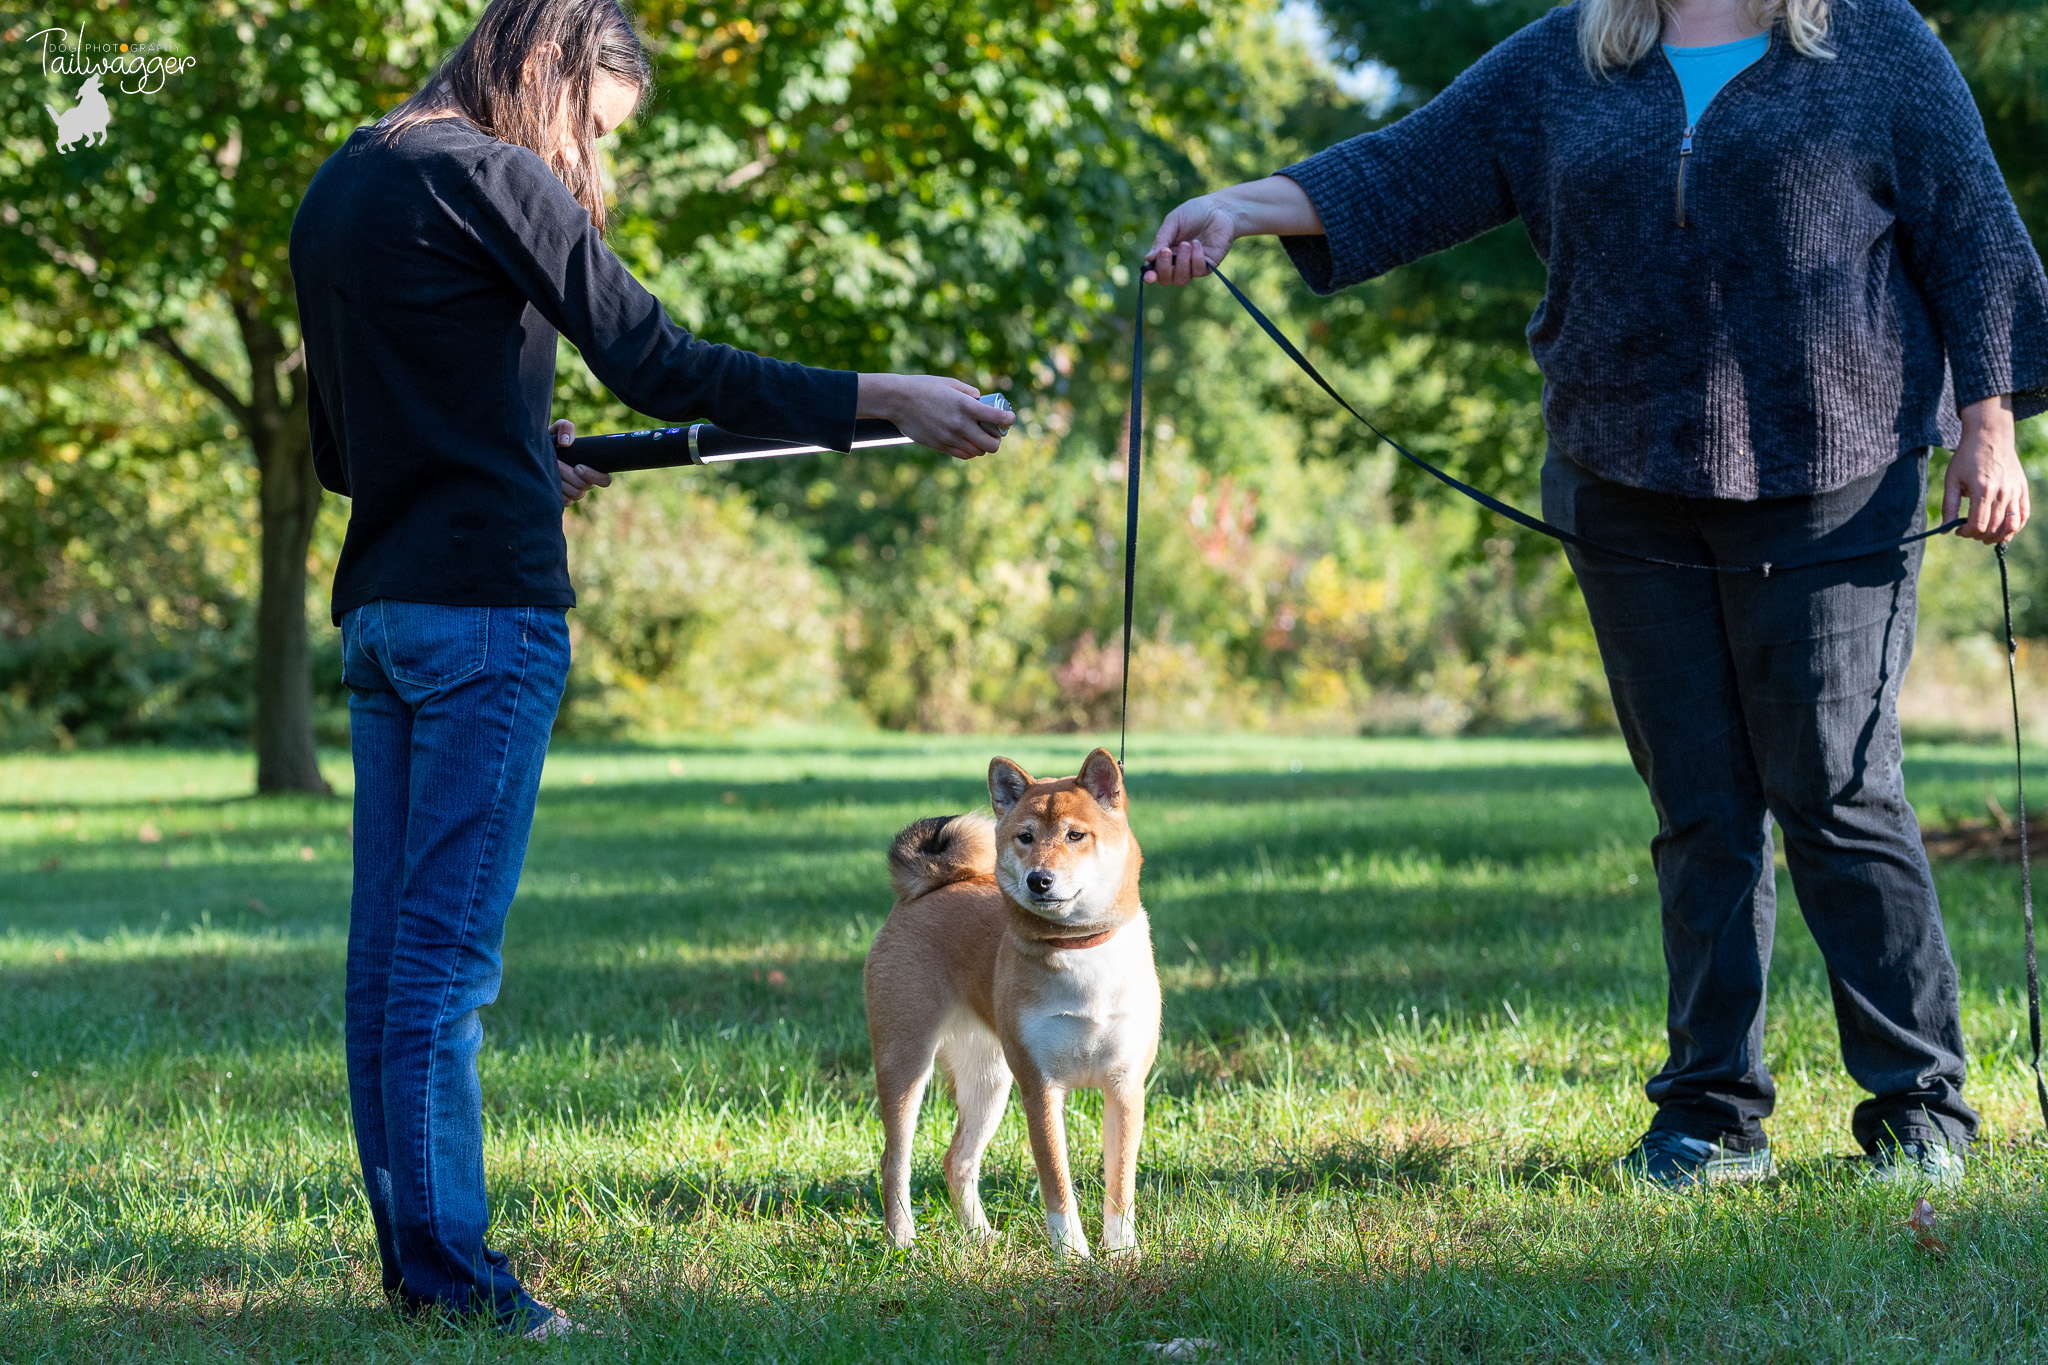 Two people help with a dog photo session at Johnson Park in grand Rapids, MI.